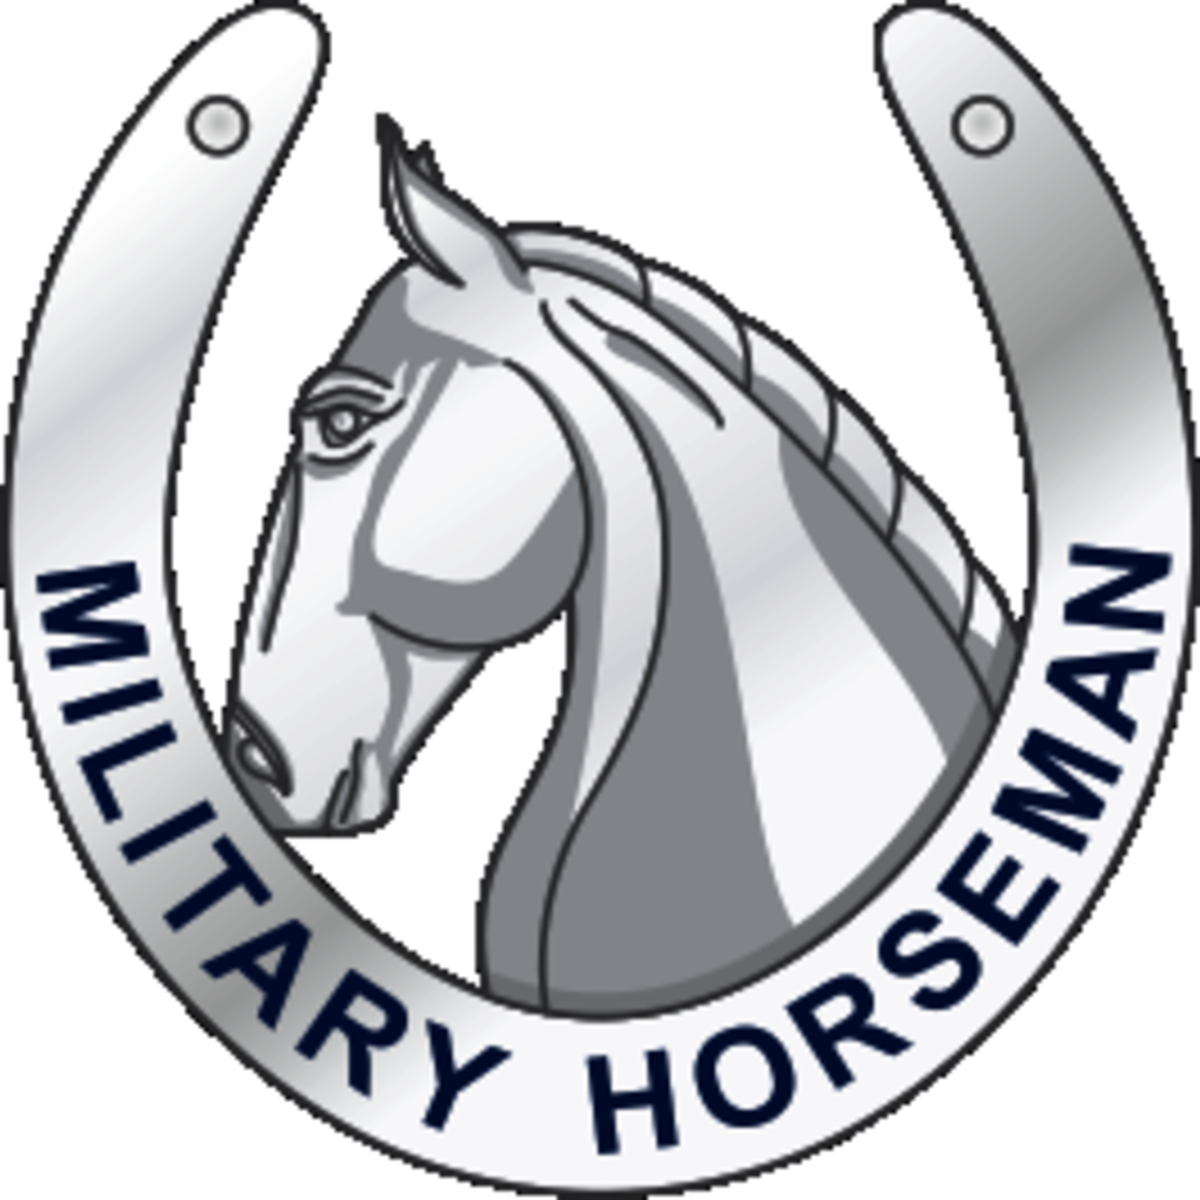  US Army Military Horseman Identification Badge Established July 18, 2017 (retroactive to February 1st, 2013) First awarded September 29, 2017 Last awarded Ongoing Total awarded 10 (September 29, 2017)